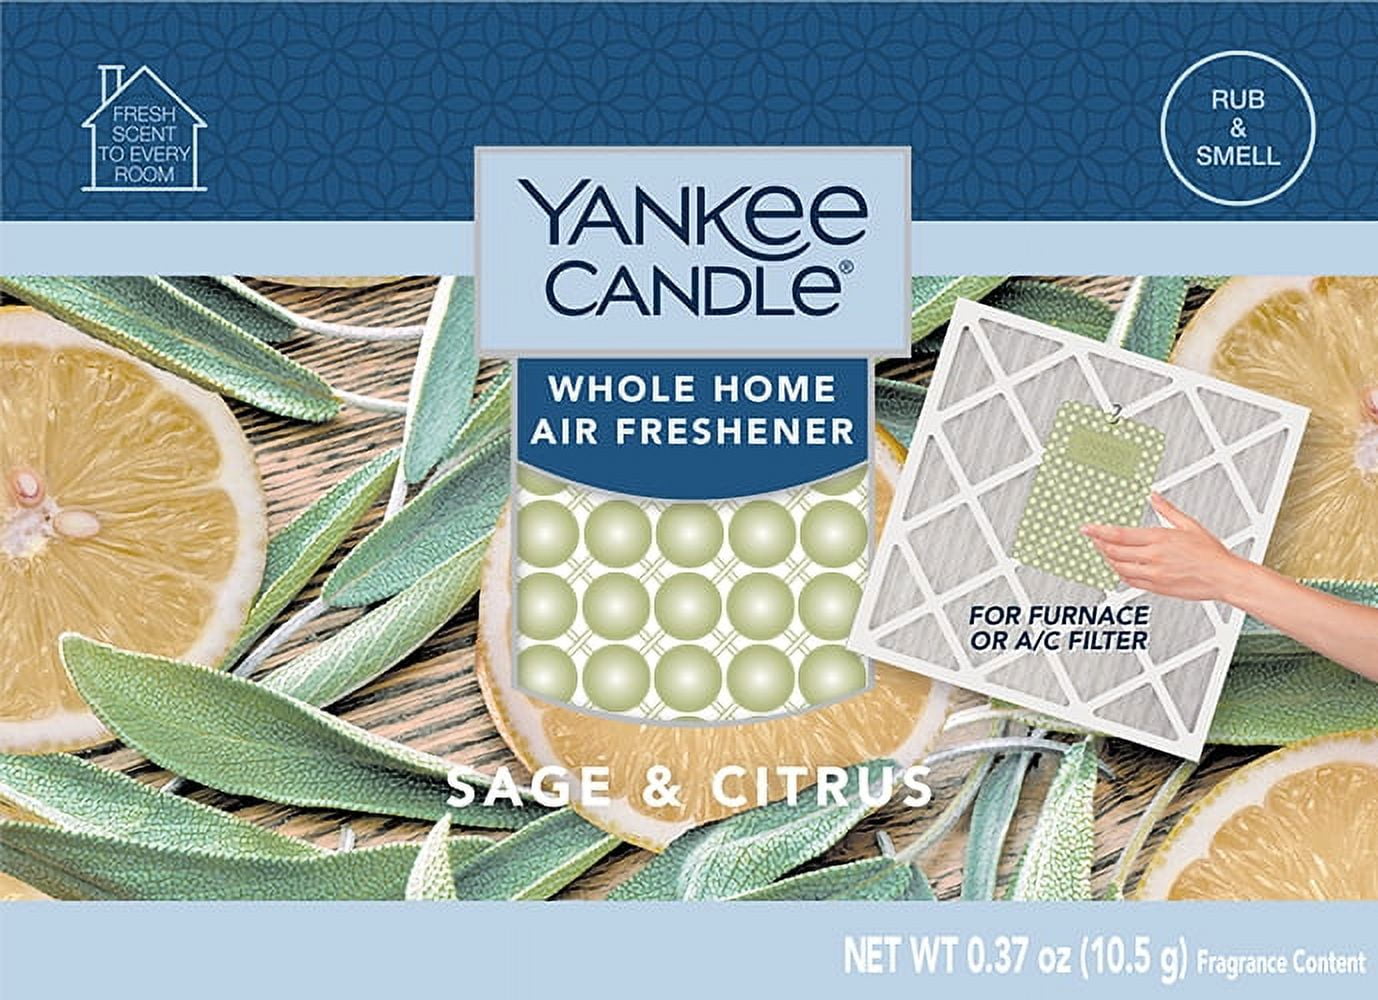 How To Use Yankee Candle Whole Home Air Freshener